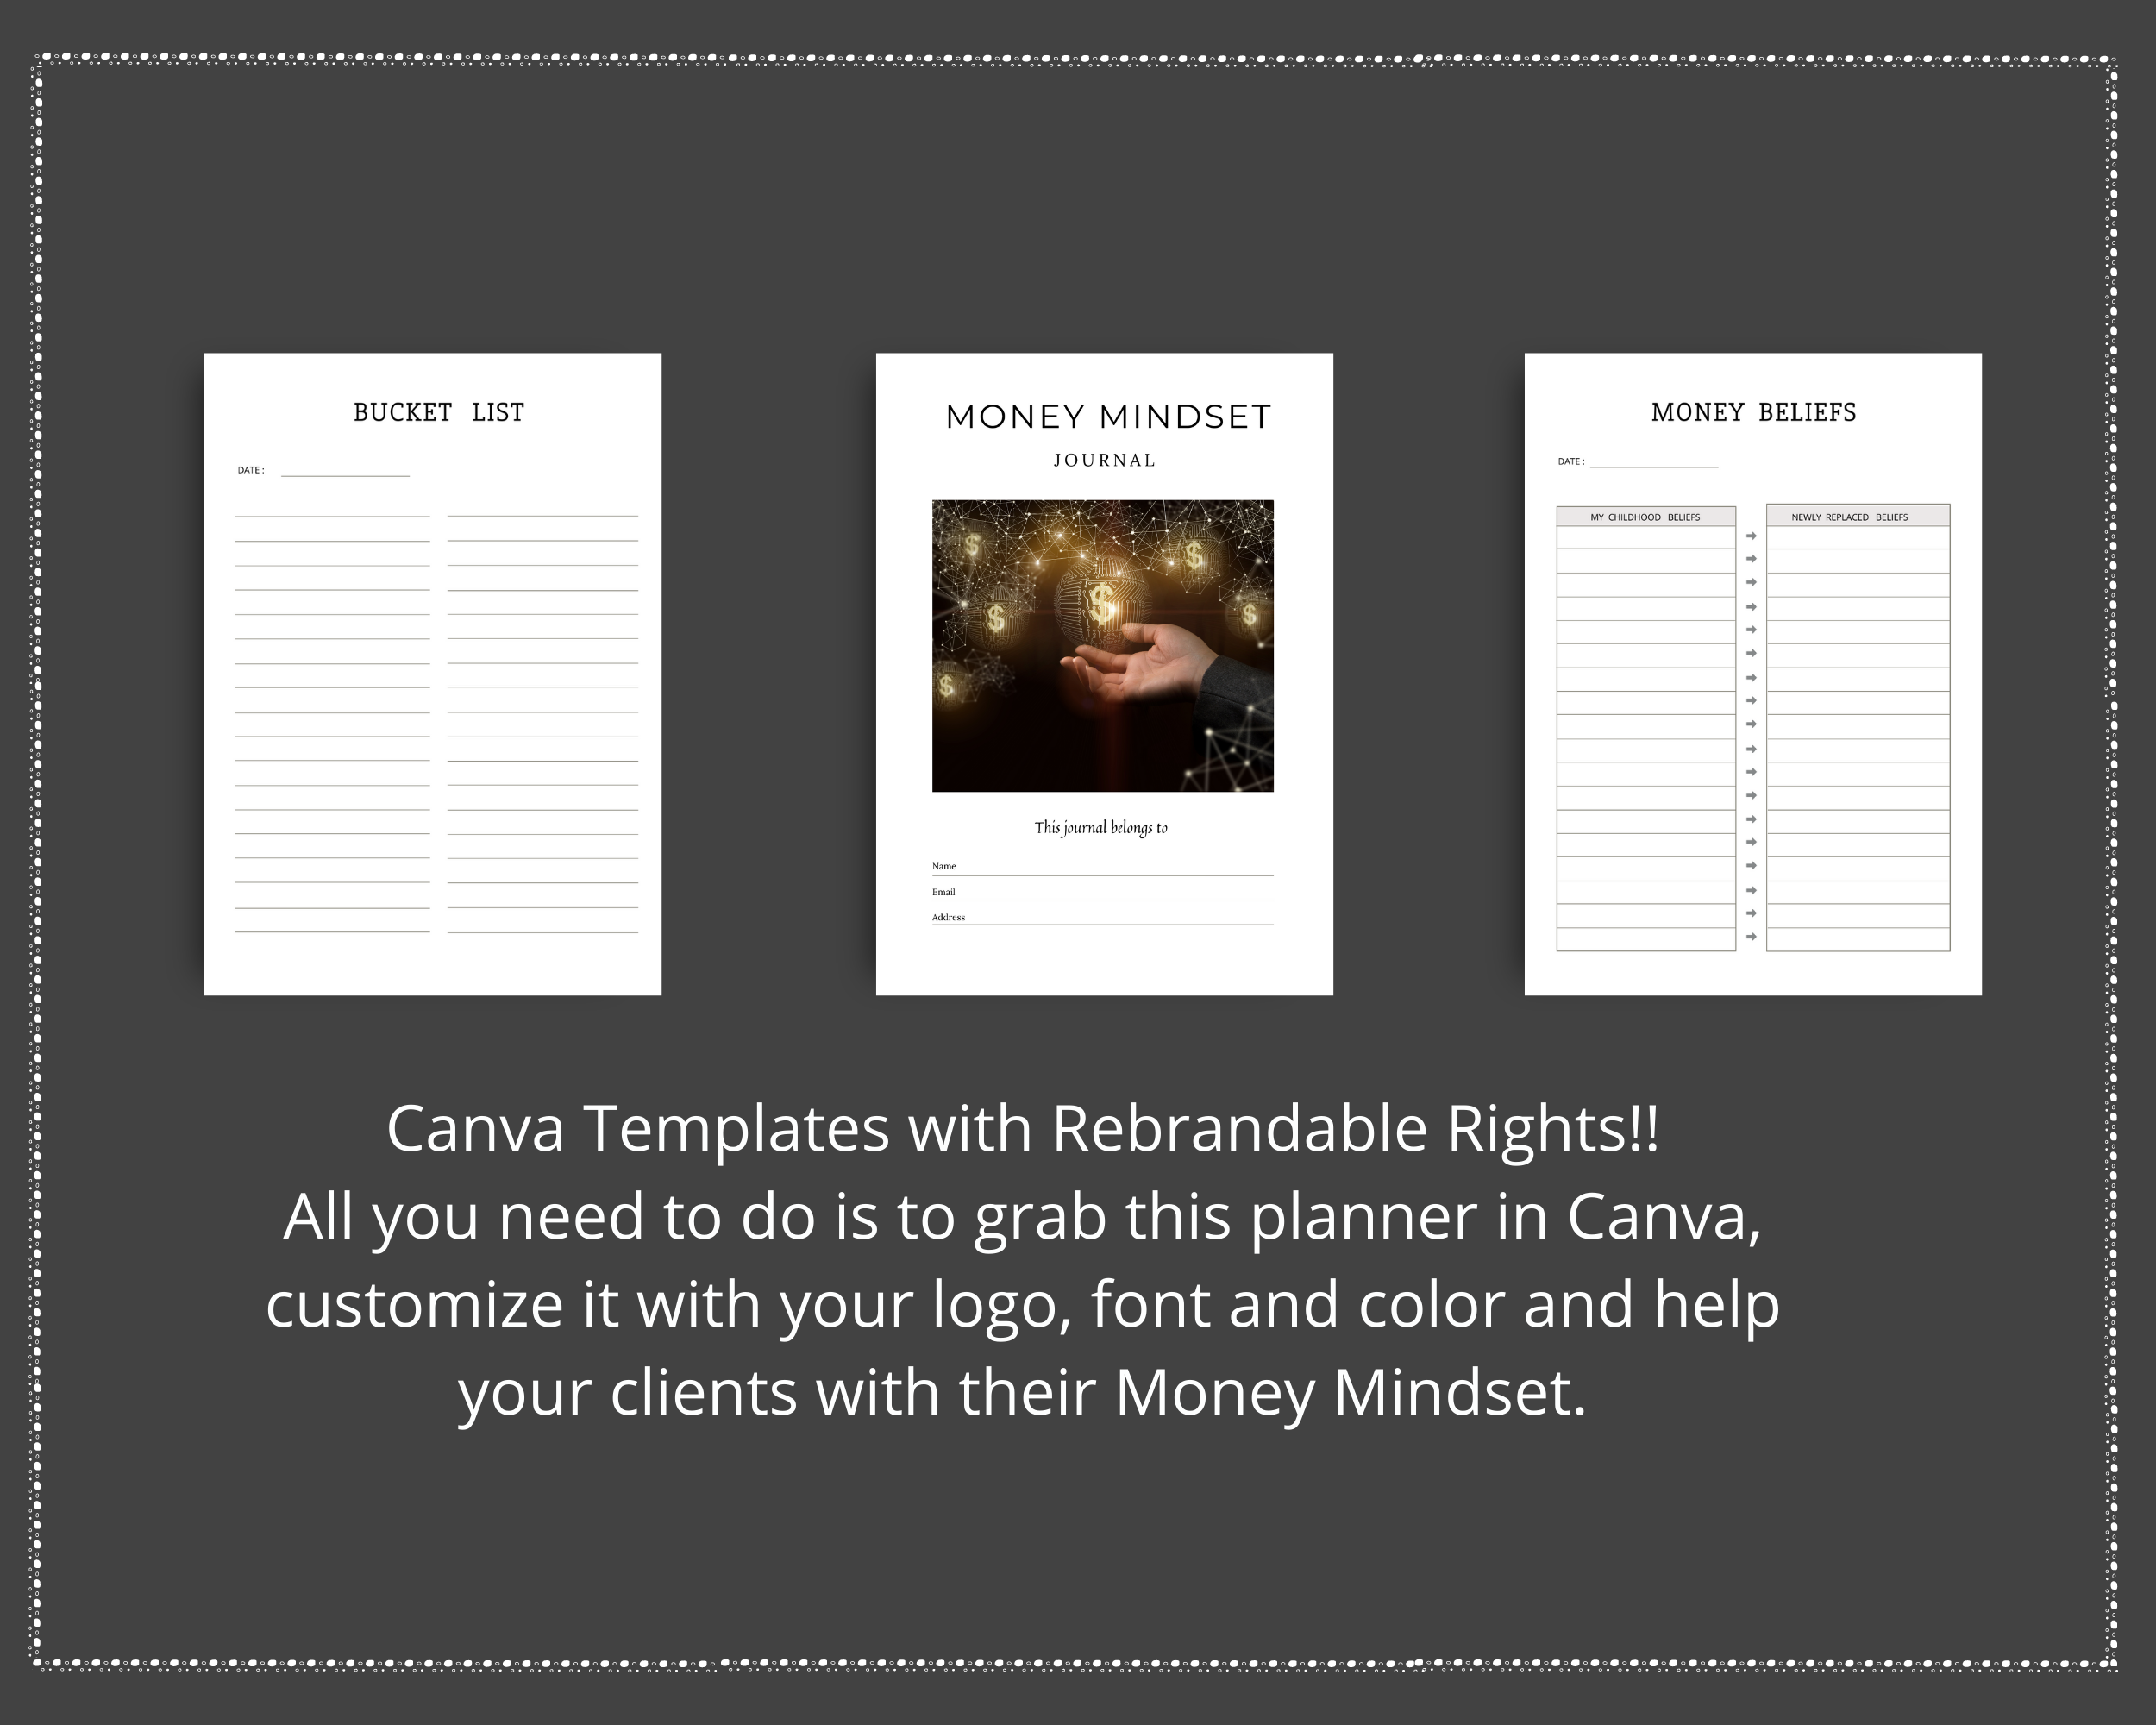 Editable Money Mindset Planner Templates in Canva | Commercial Use